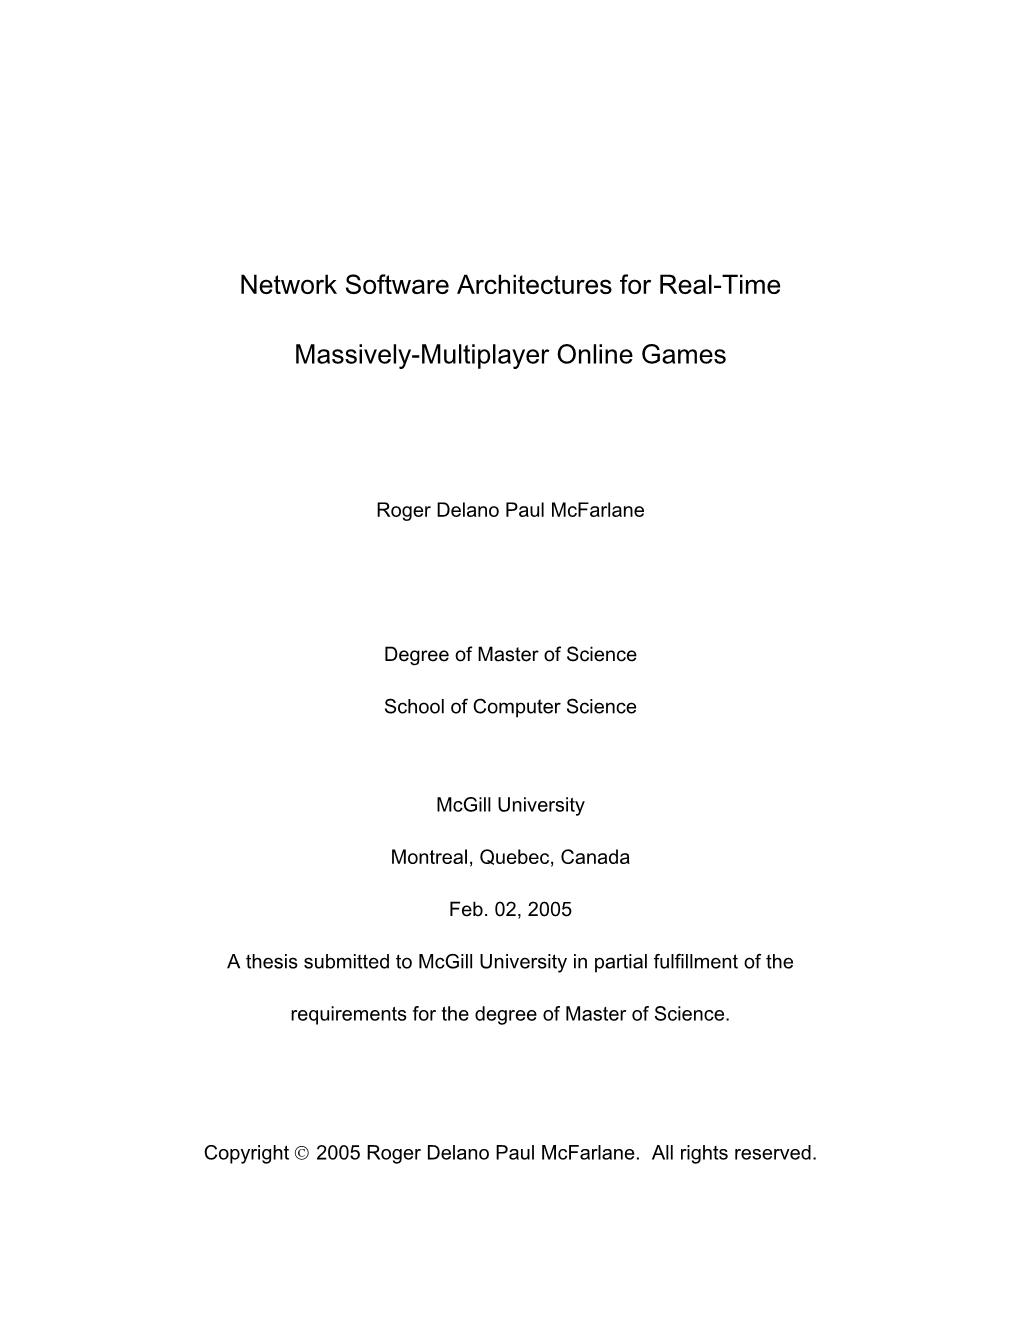 Network Software Architectures for Real-Time Massively-Multiplayer